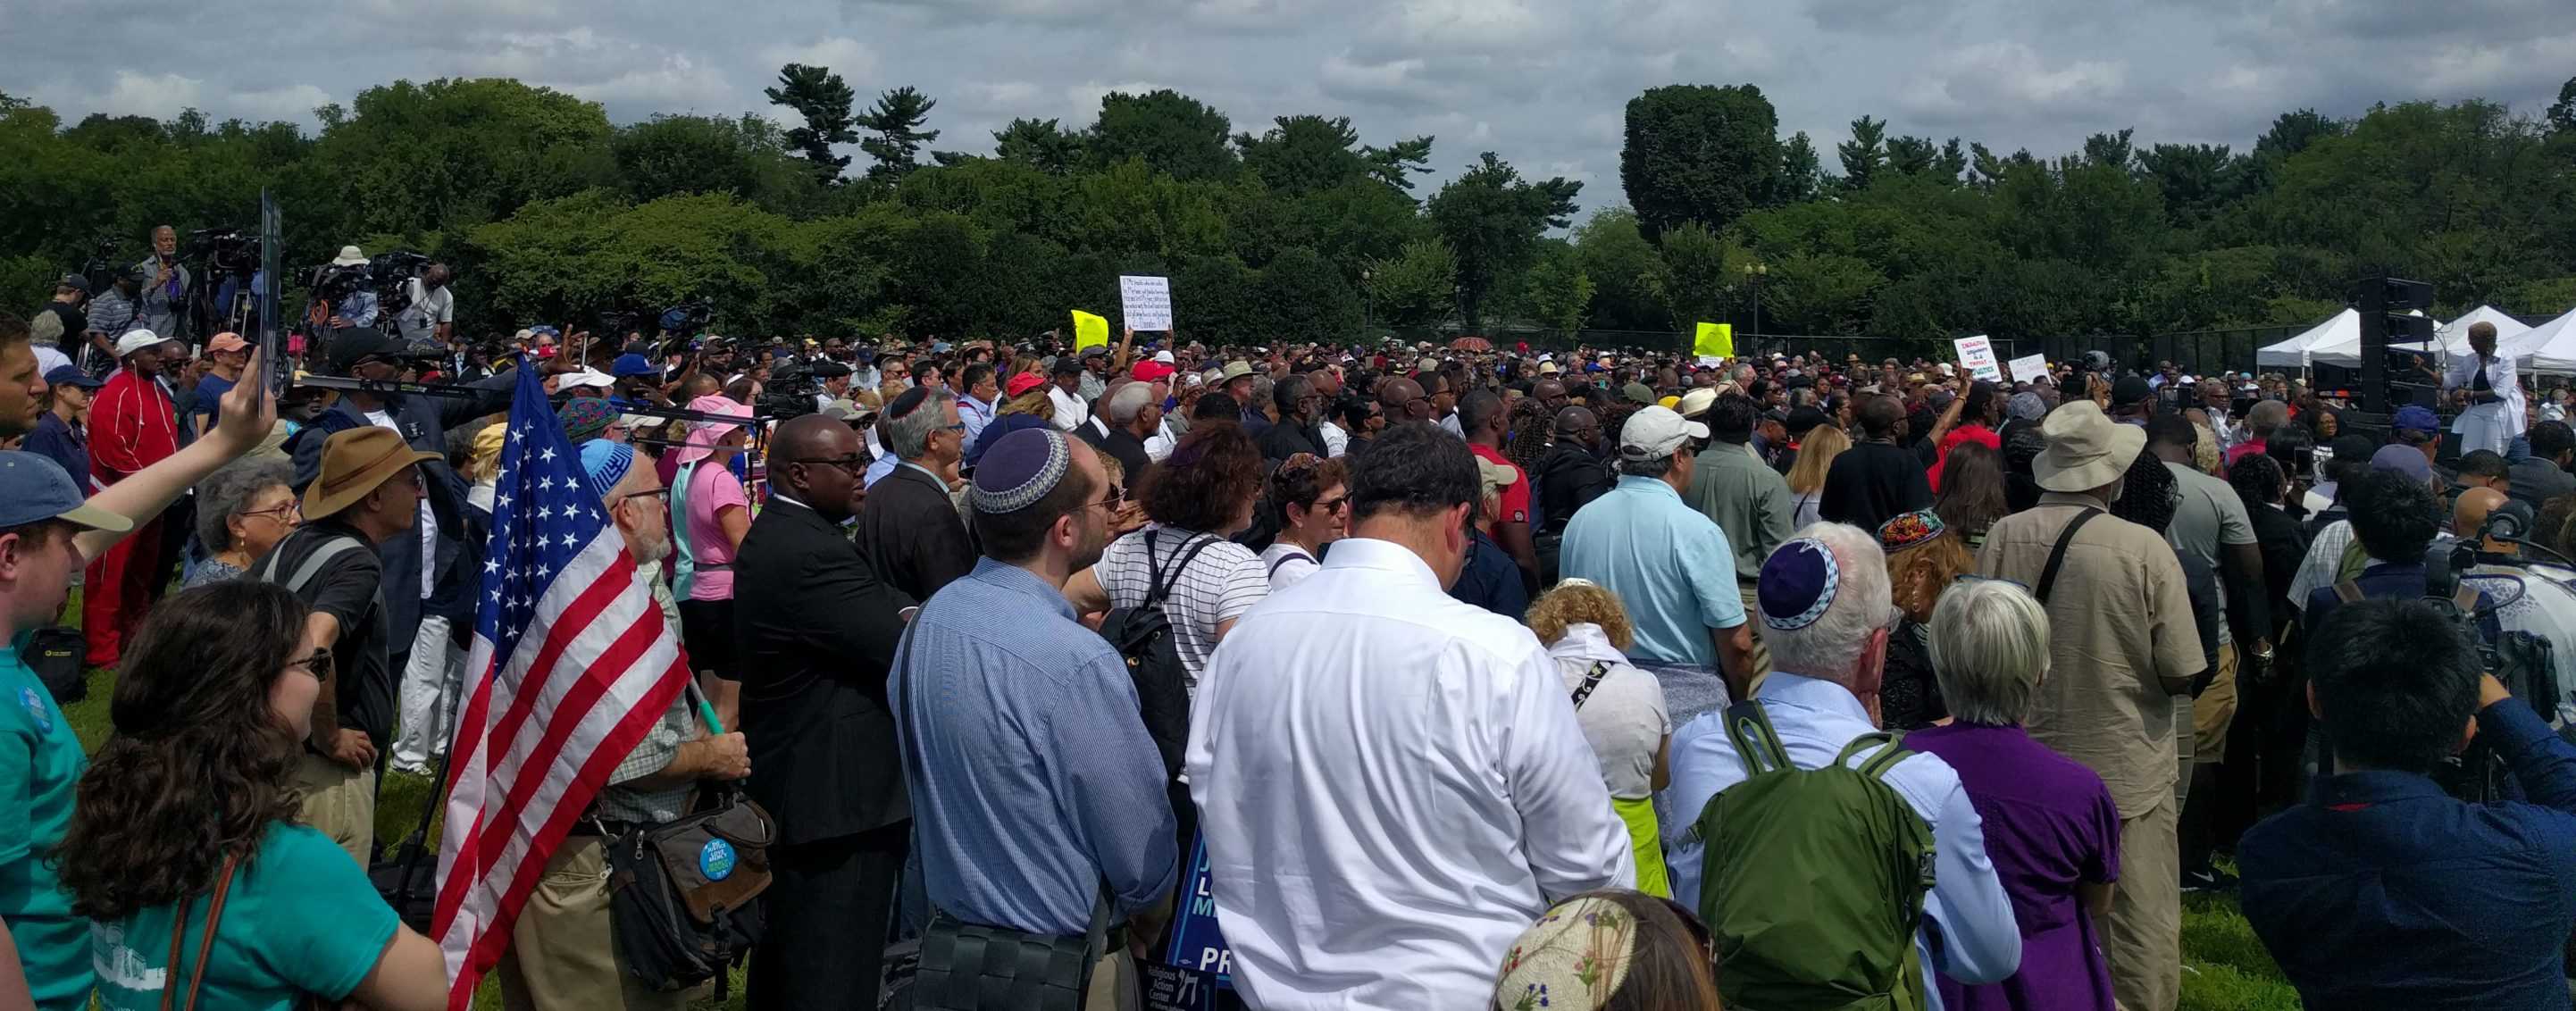 54 Years After Historic March On Washington, Over 3000 Religious Leaders Continue the March For Civil Rights